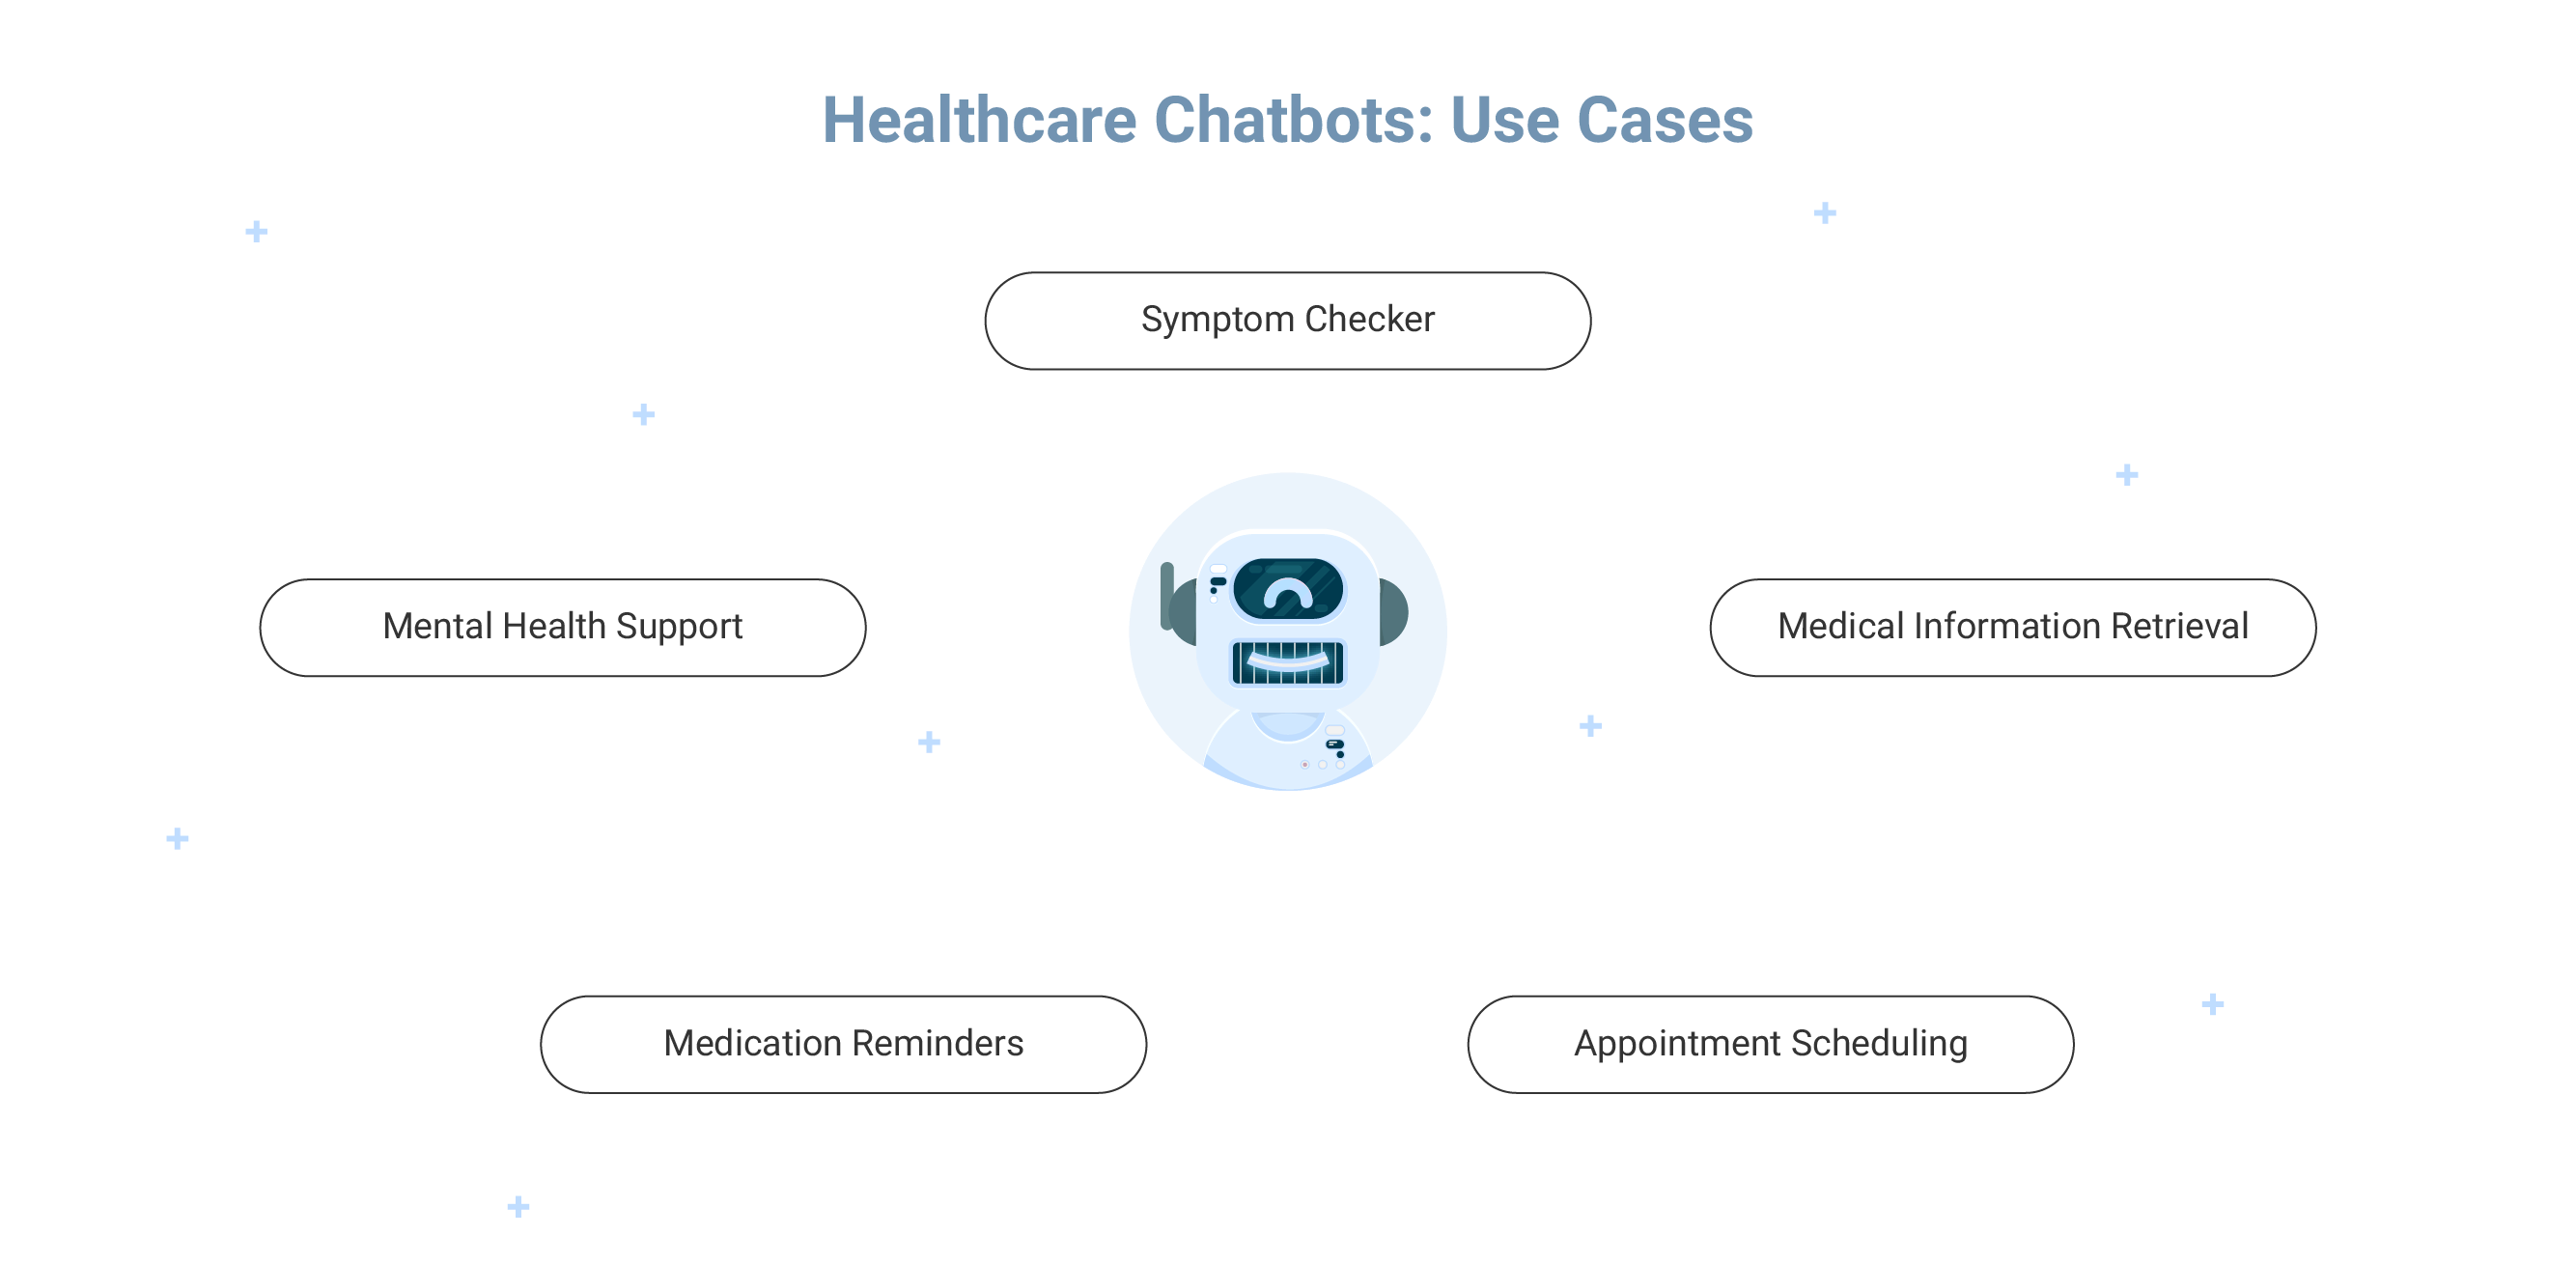 13 Different Usages of Healthcare Chatbots